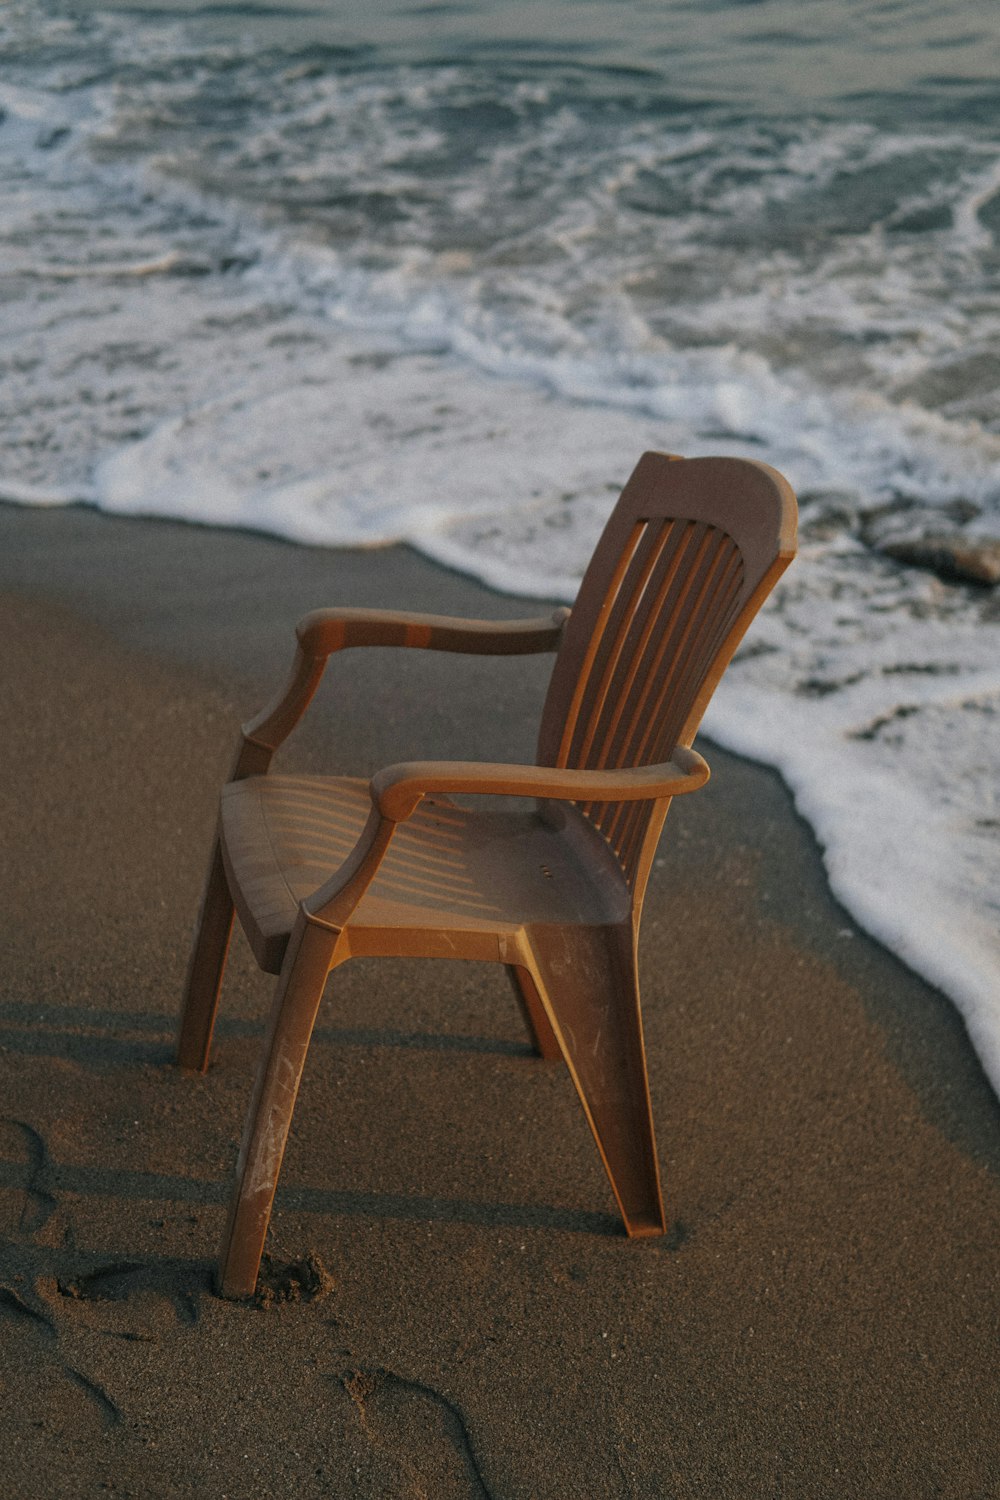 brown wooden armchair on beach shore during daytime